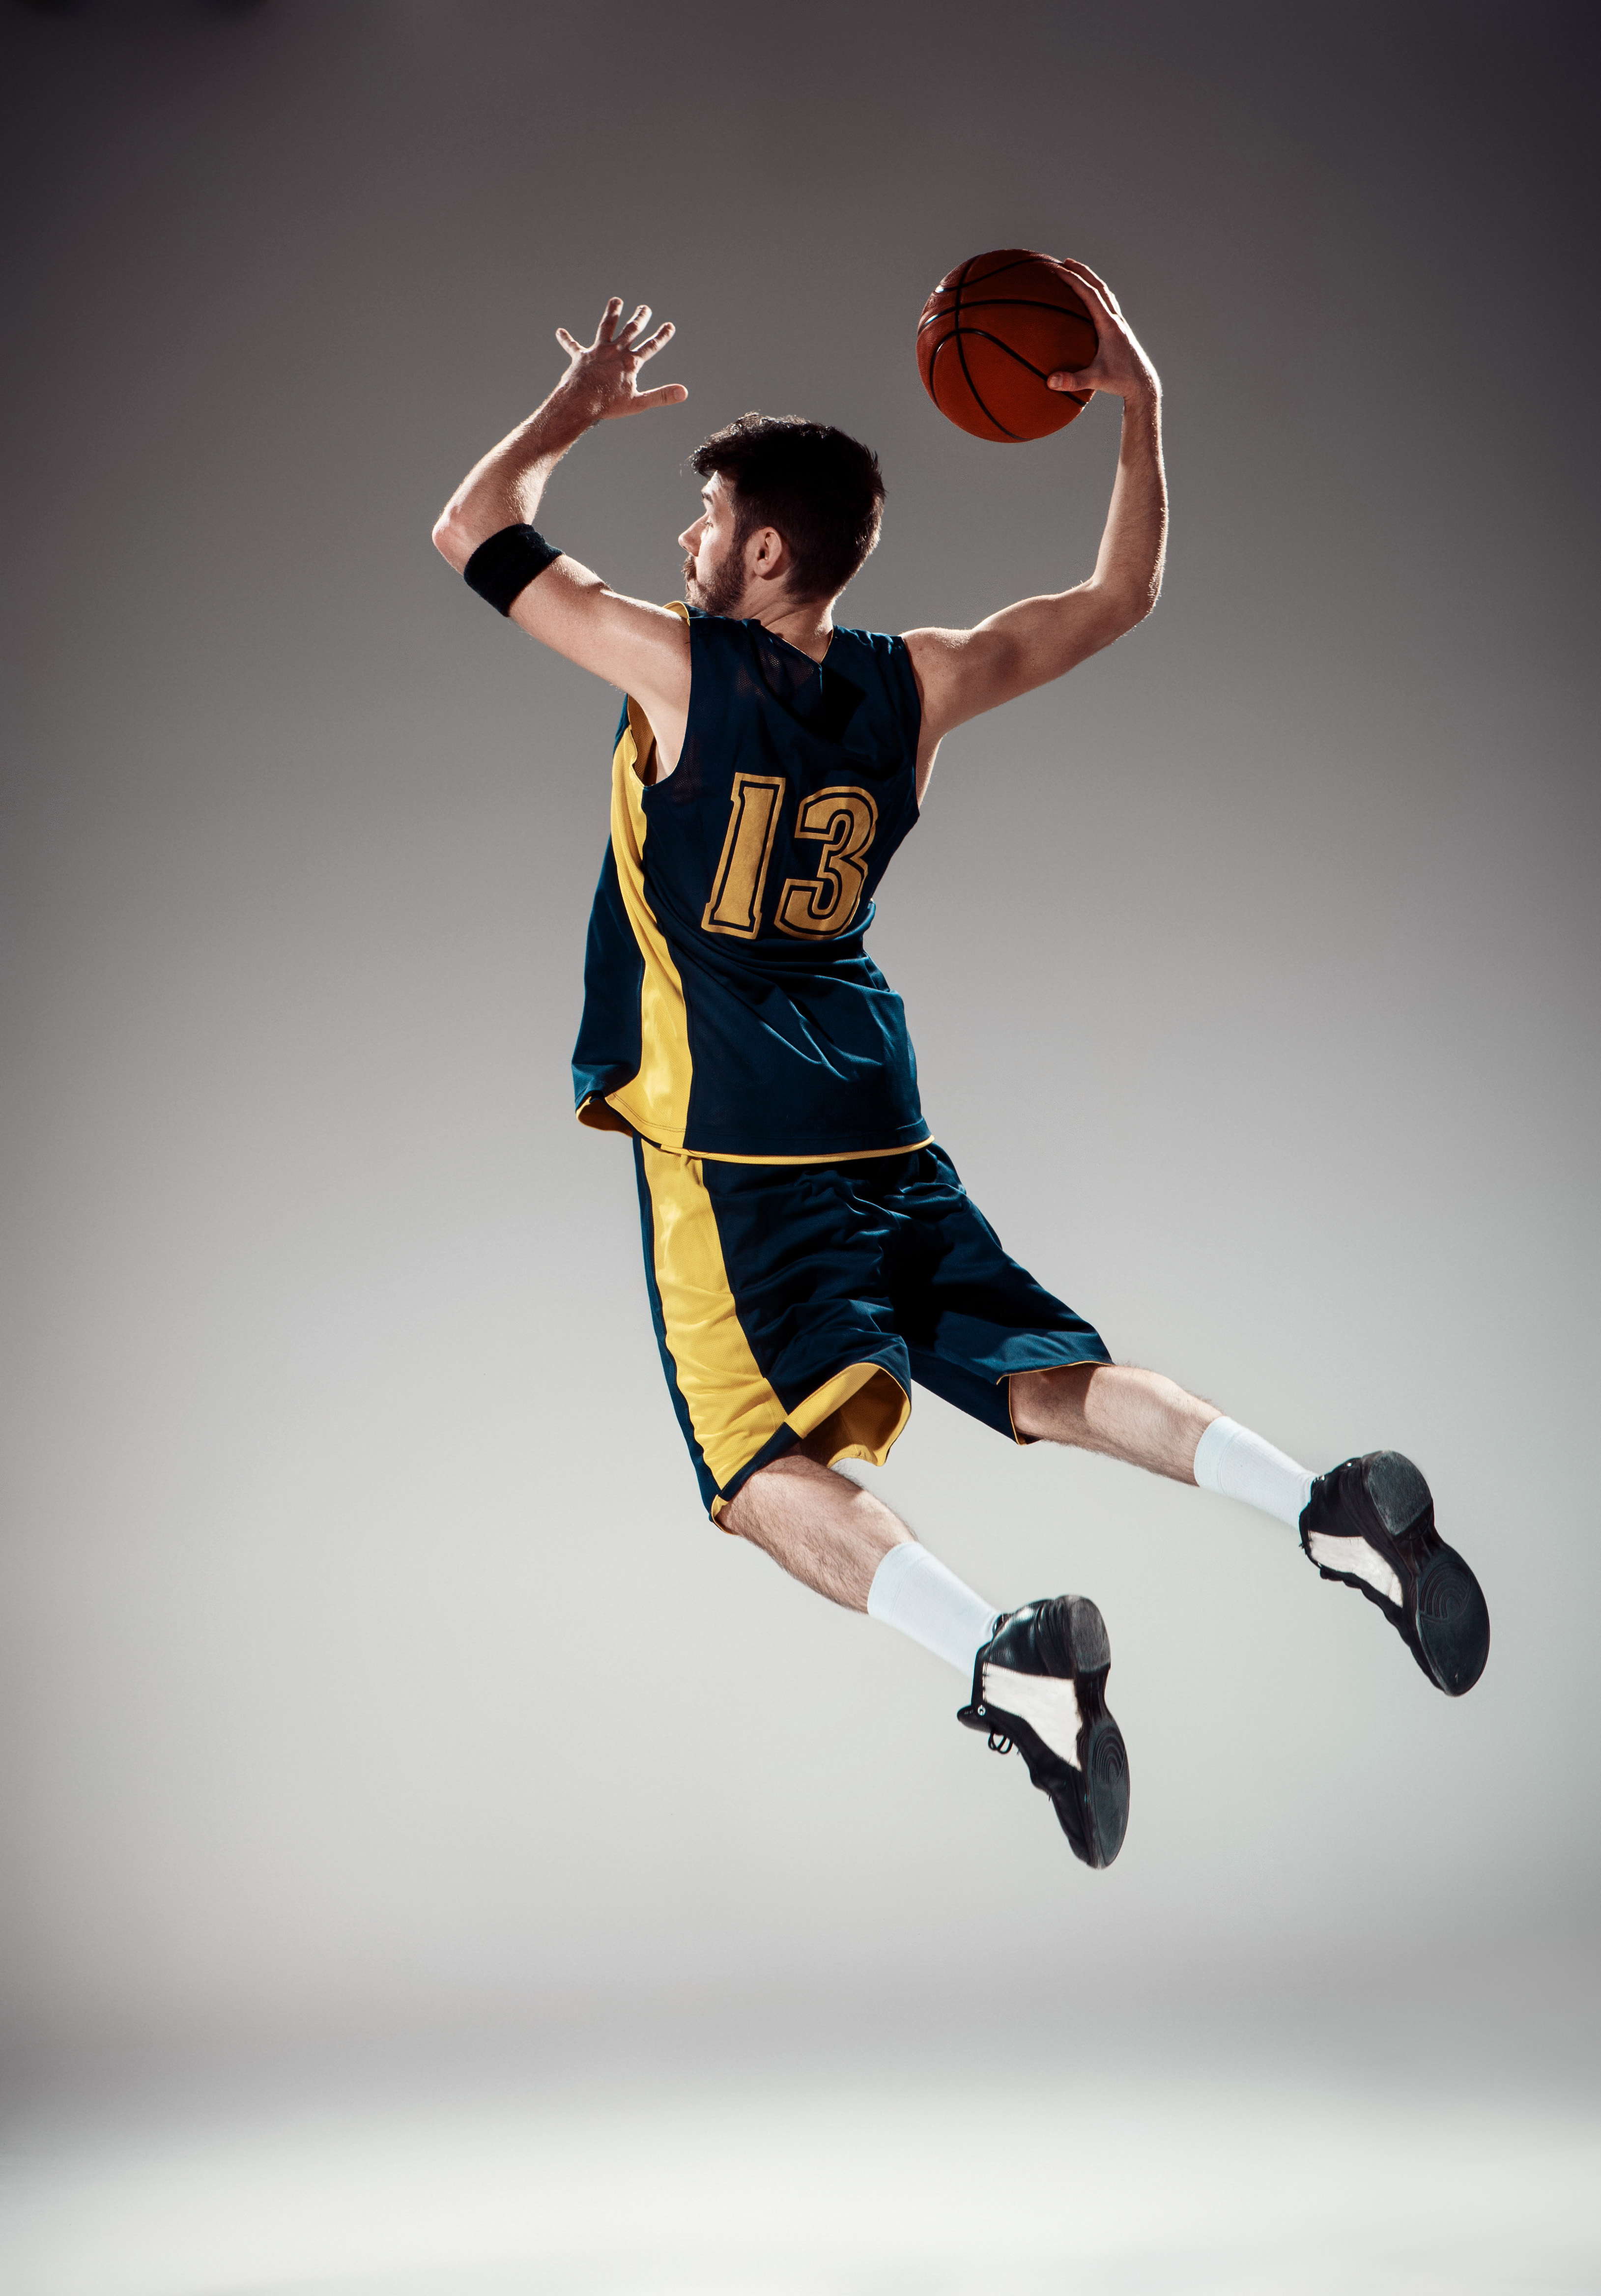 Full length portrait of a basketball player with a ball against gray studio background